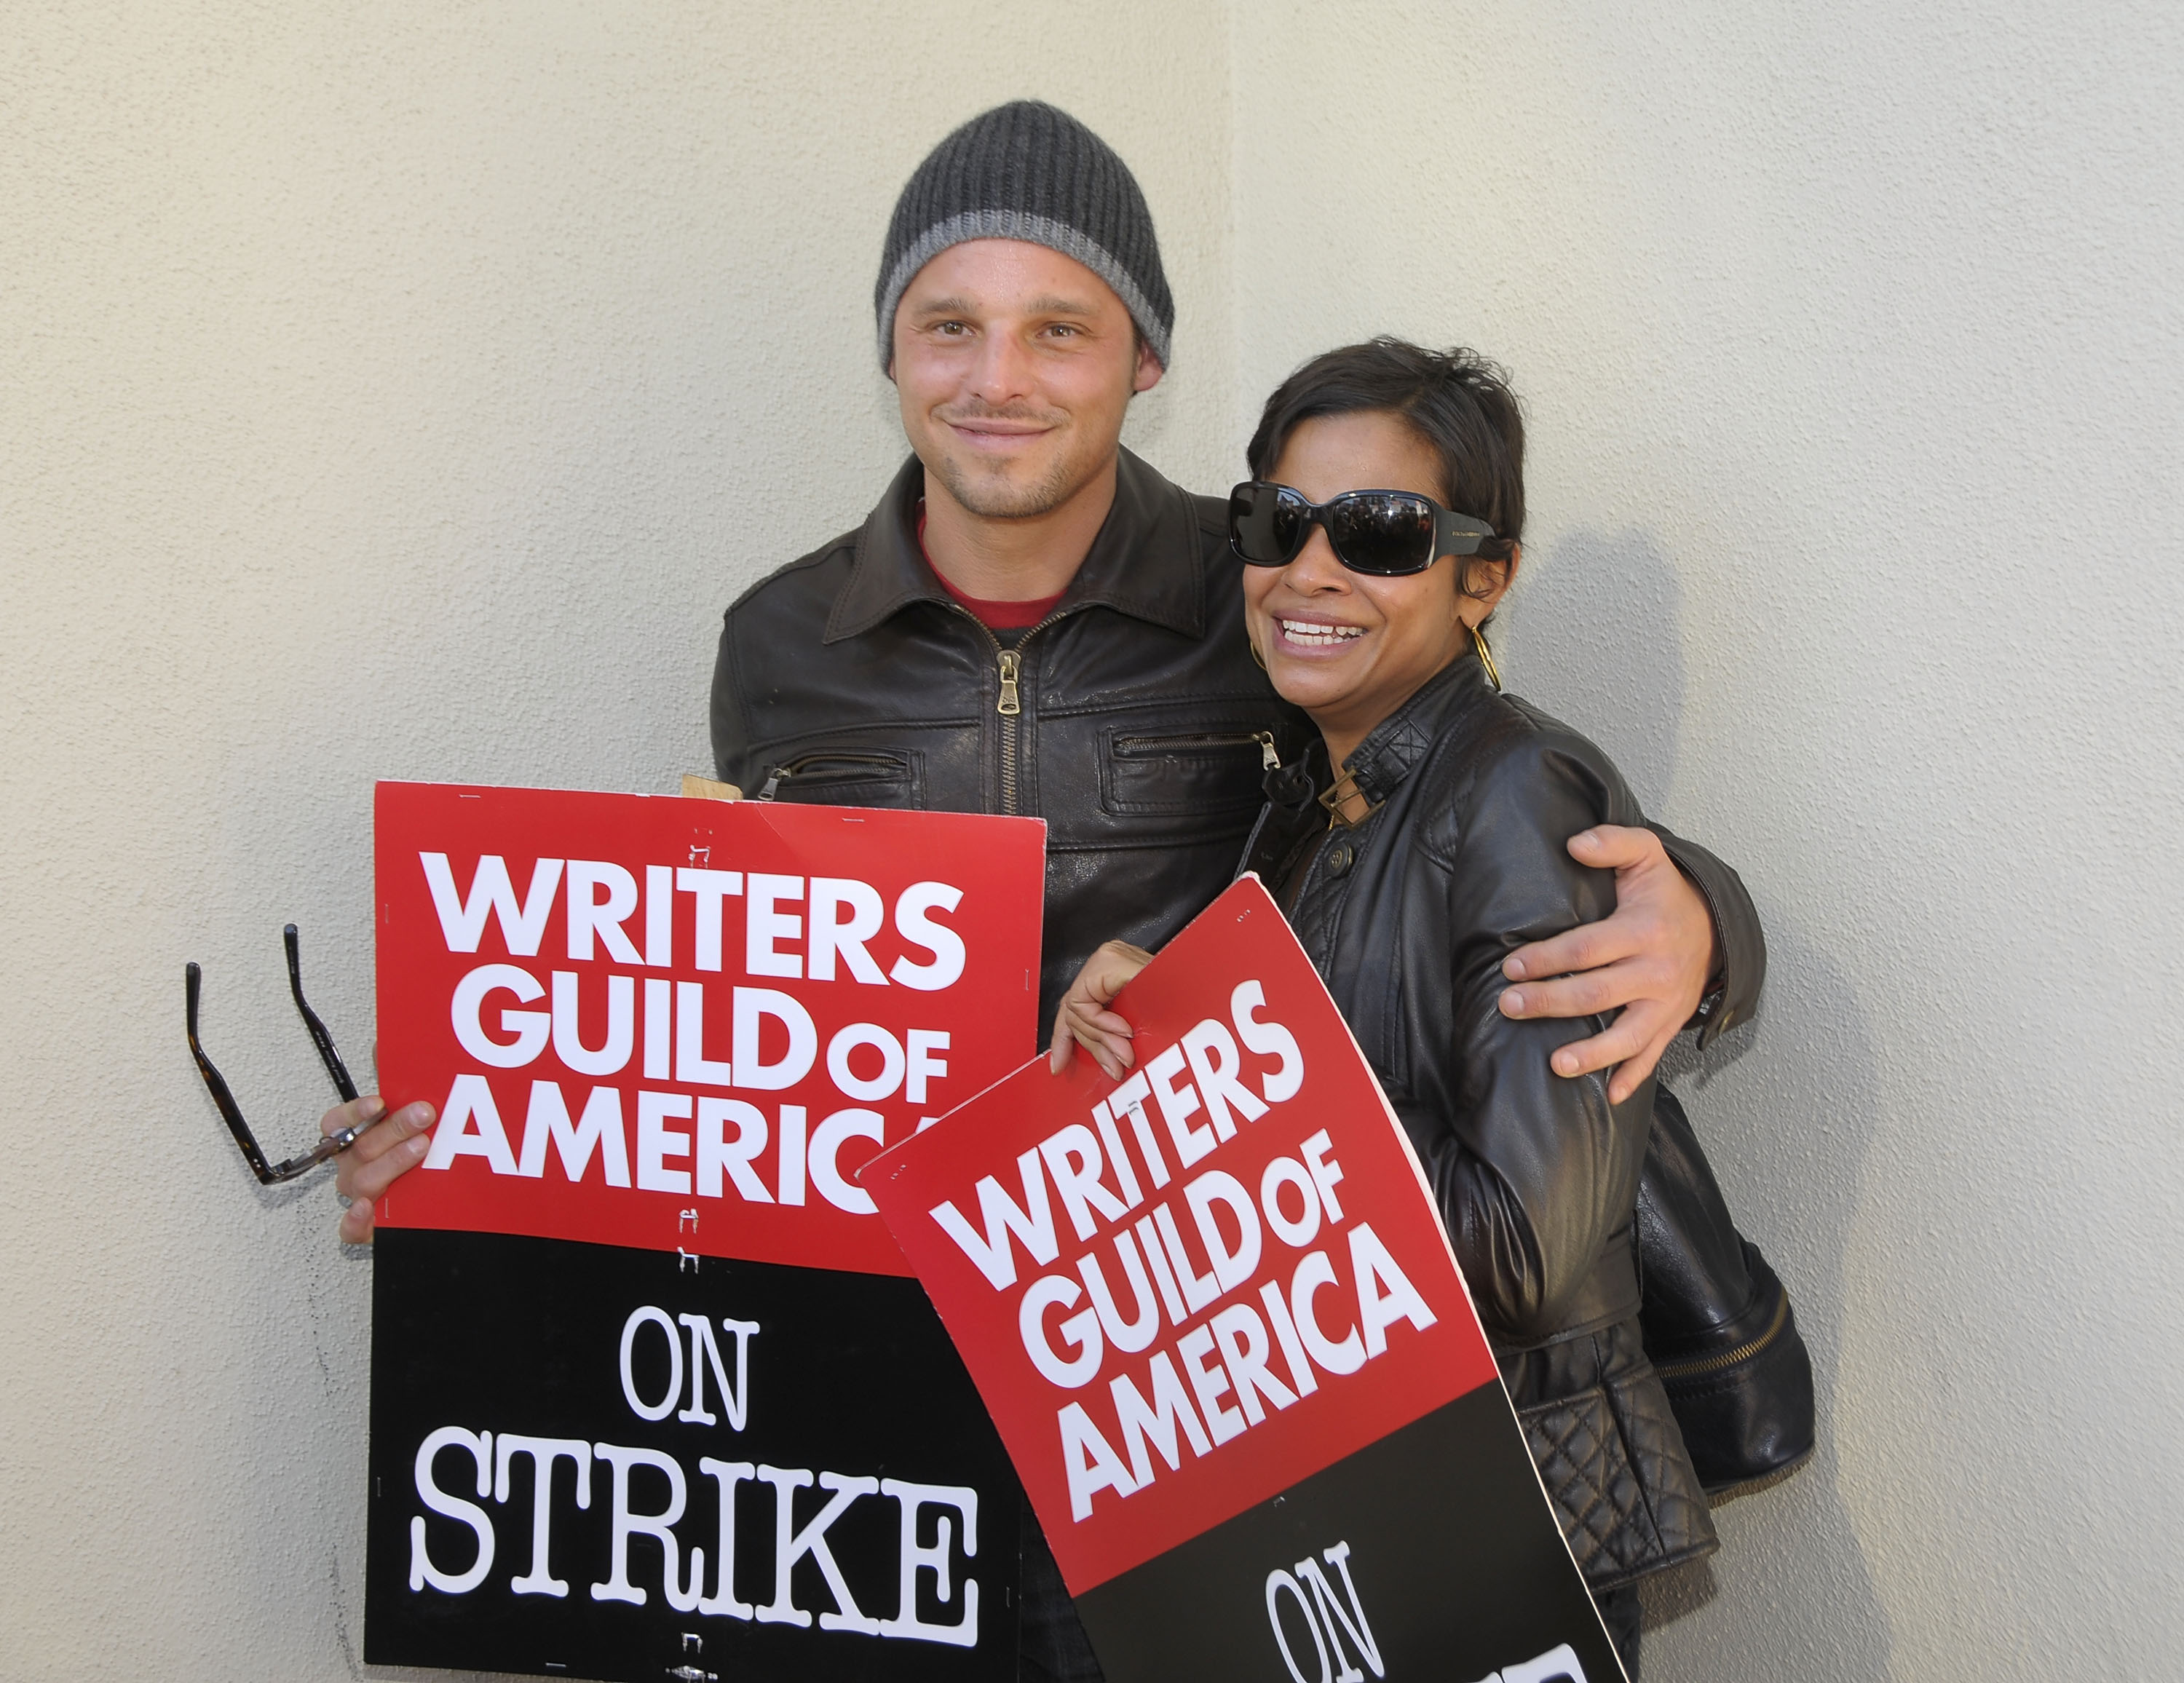 Justin Chambers (L) and wife Keisha Chambers march to support the striking Writer's Guild of America's 'Diversity Day' at Paramount Pictures studio, on December 12, 2007, in Los Angeles, California. | Source: Getty Images